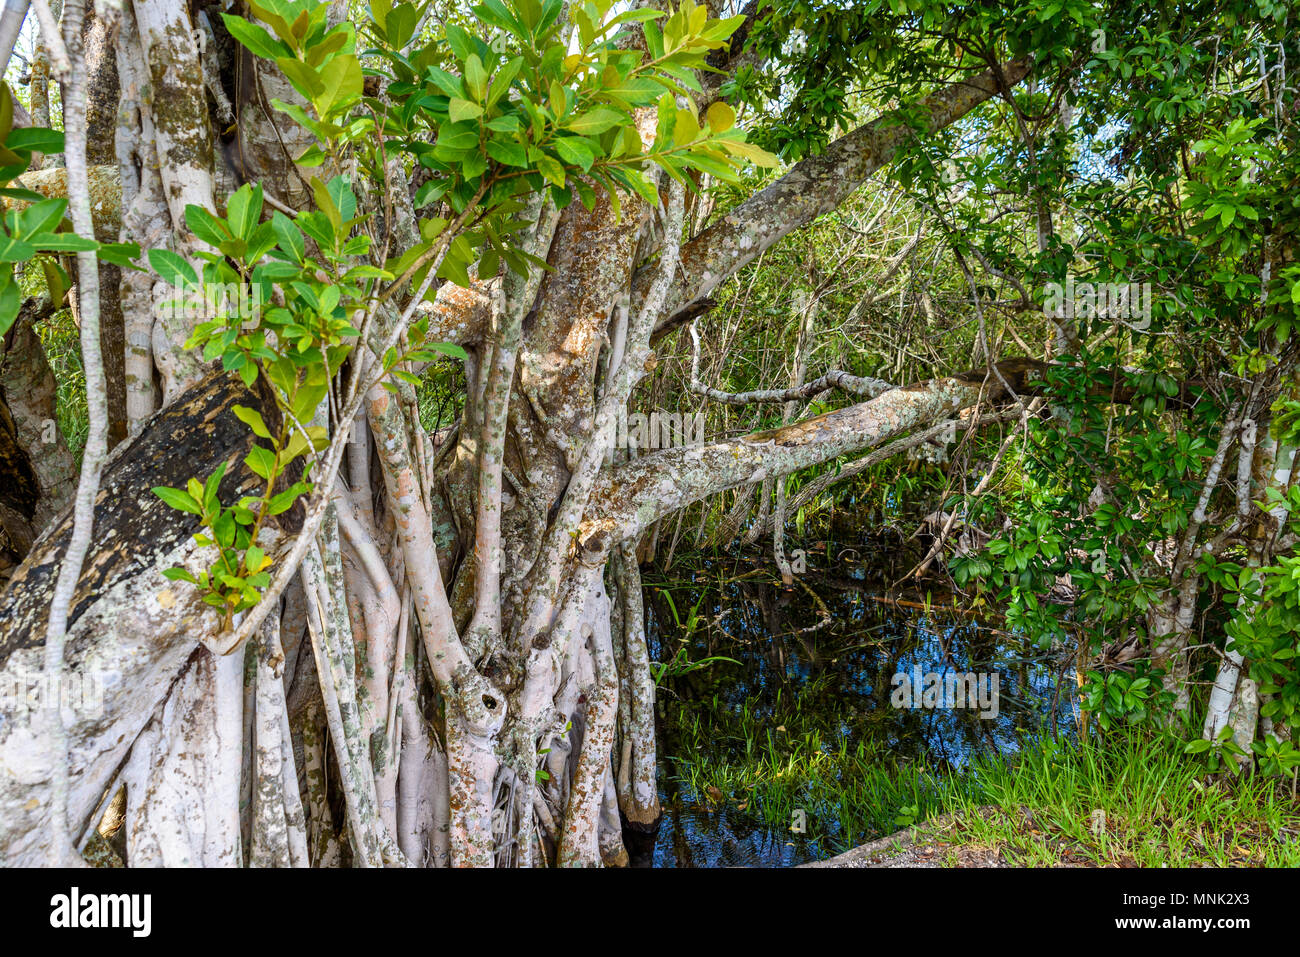 Anhinga Trail of the Everglades National Park. Boardwalks in the swamp. Florida, USA. Stock Photo